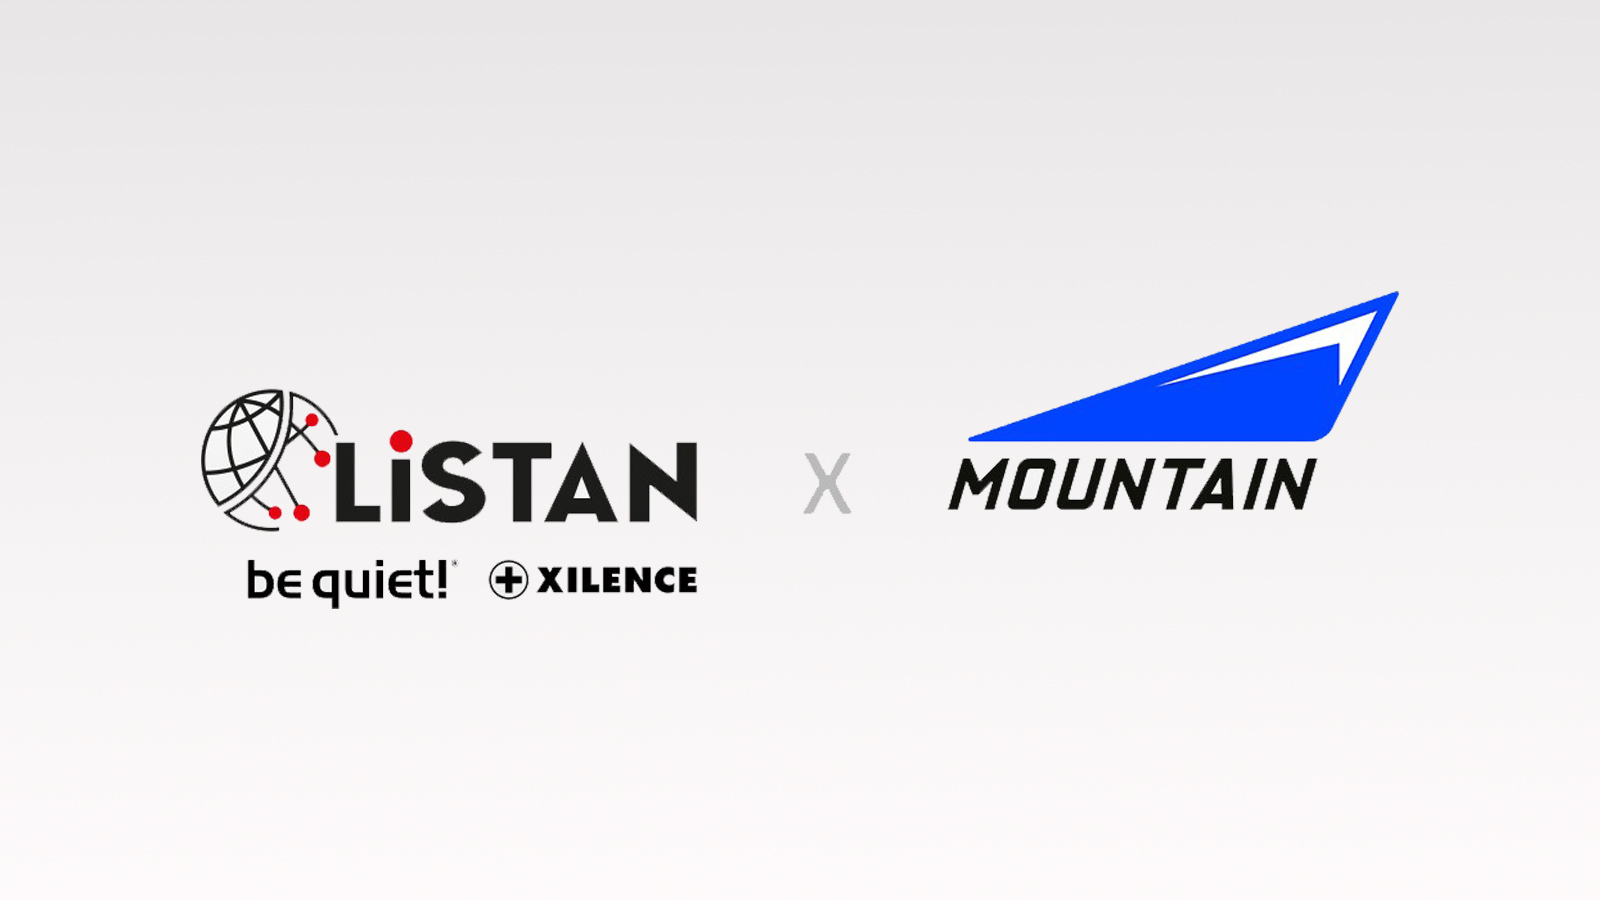 Peripheral producer Mountain acquired by “be quiet!” homeowners Listan Group – Egaxo